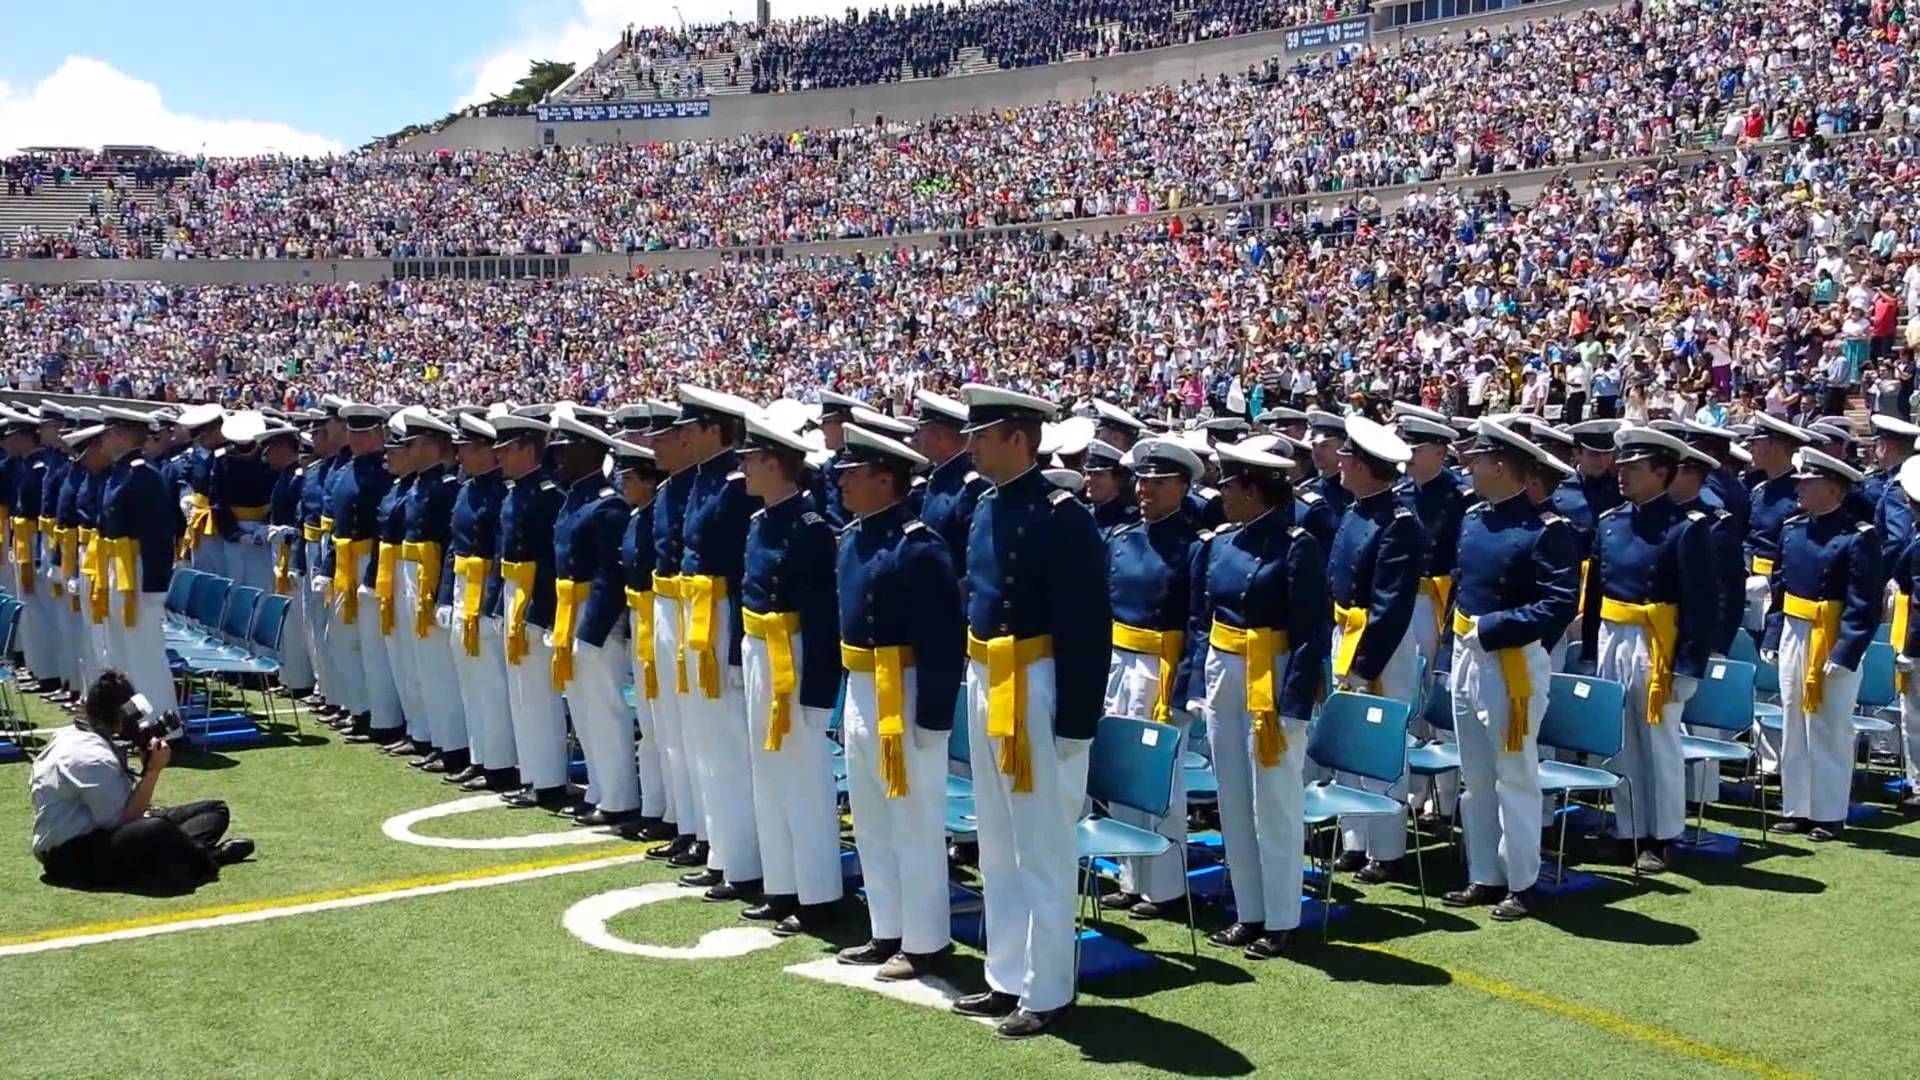 US Air Force Academy “Integrity First, Service Before Self, and